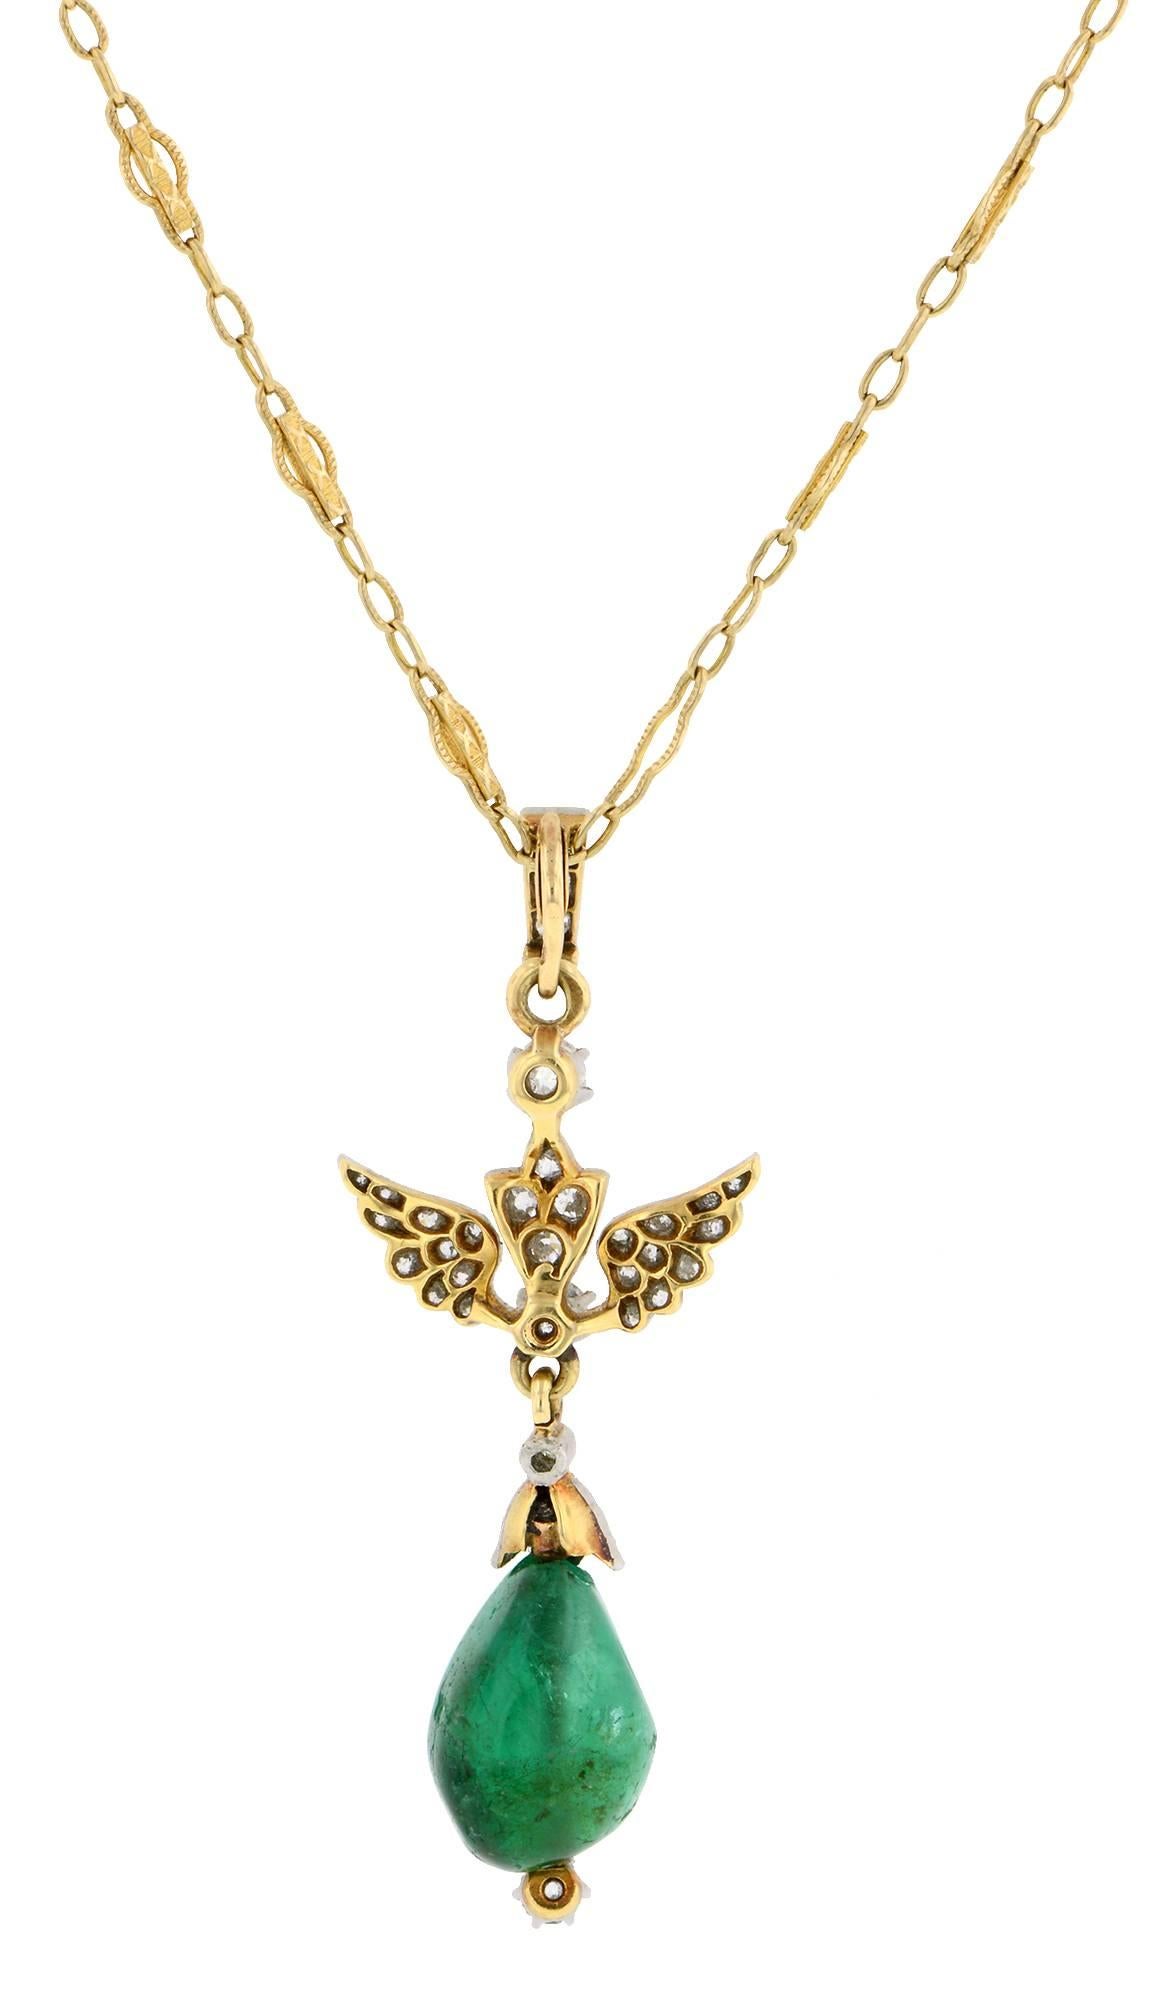 Vintage Austrian emerald & diamond wing pendant measuring app. 2 inches long (including bail) with emerald drop measuring app. 14mm x 11.4mm, suspended from a pair of wings set with Old European cut diamonds weighing app. 0.80ctw., fashioned in